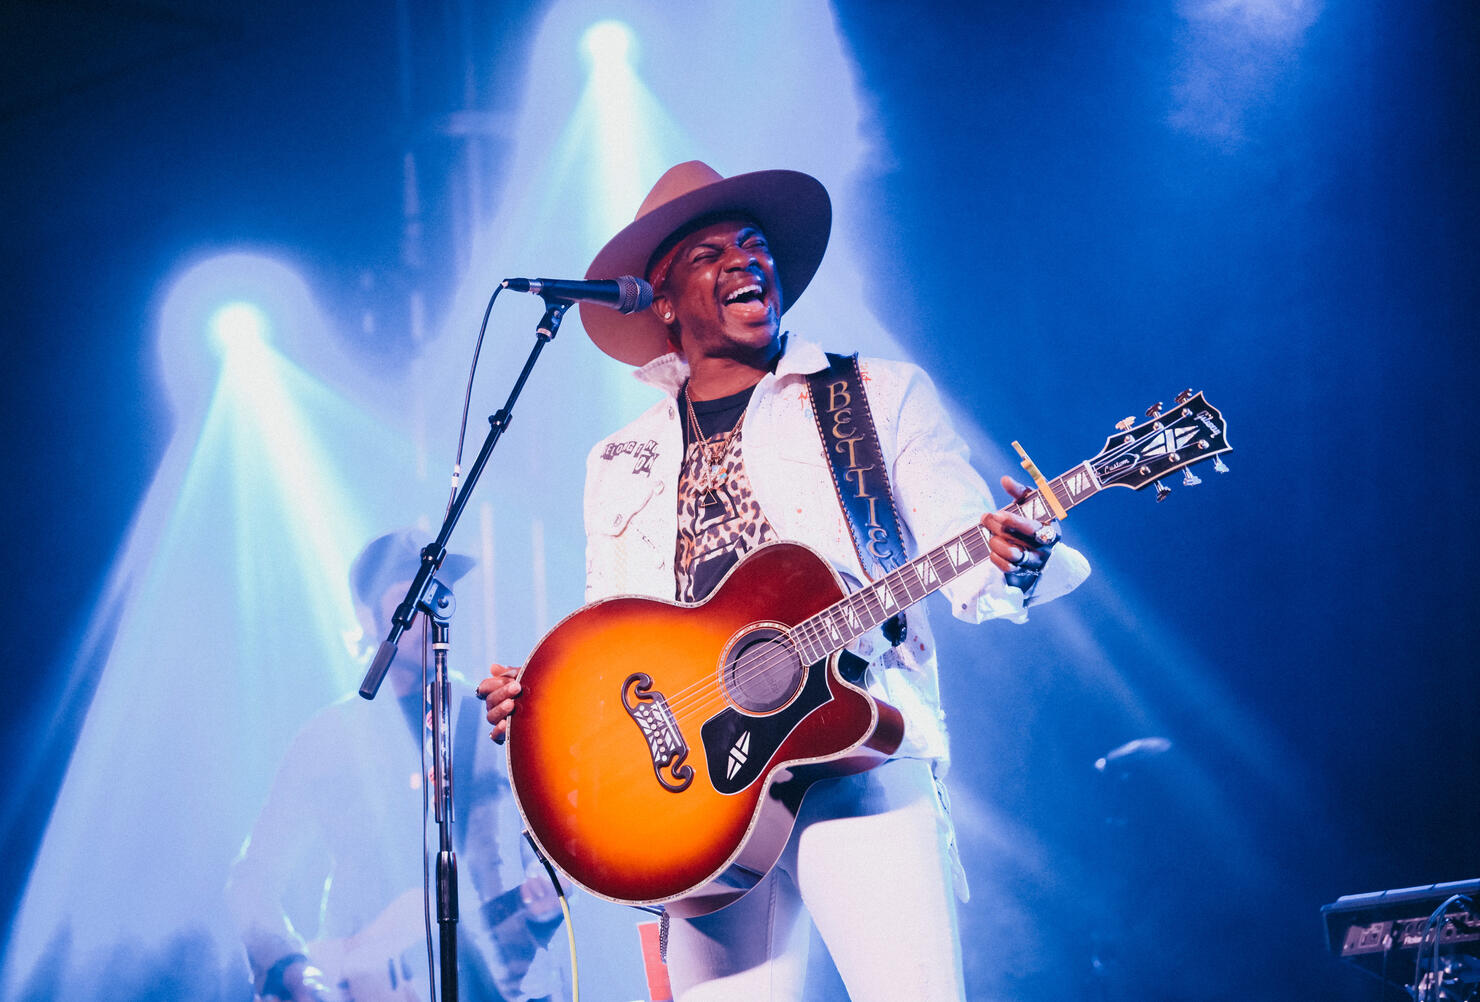 Dustin Lynch With Special Guests: Jimmie Allen And LOCASH Live Stream Concert - Nashville, TN